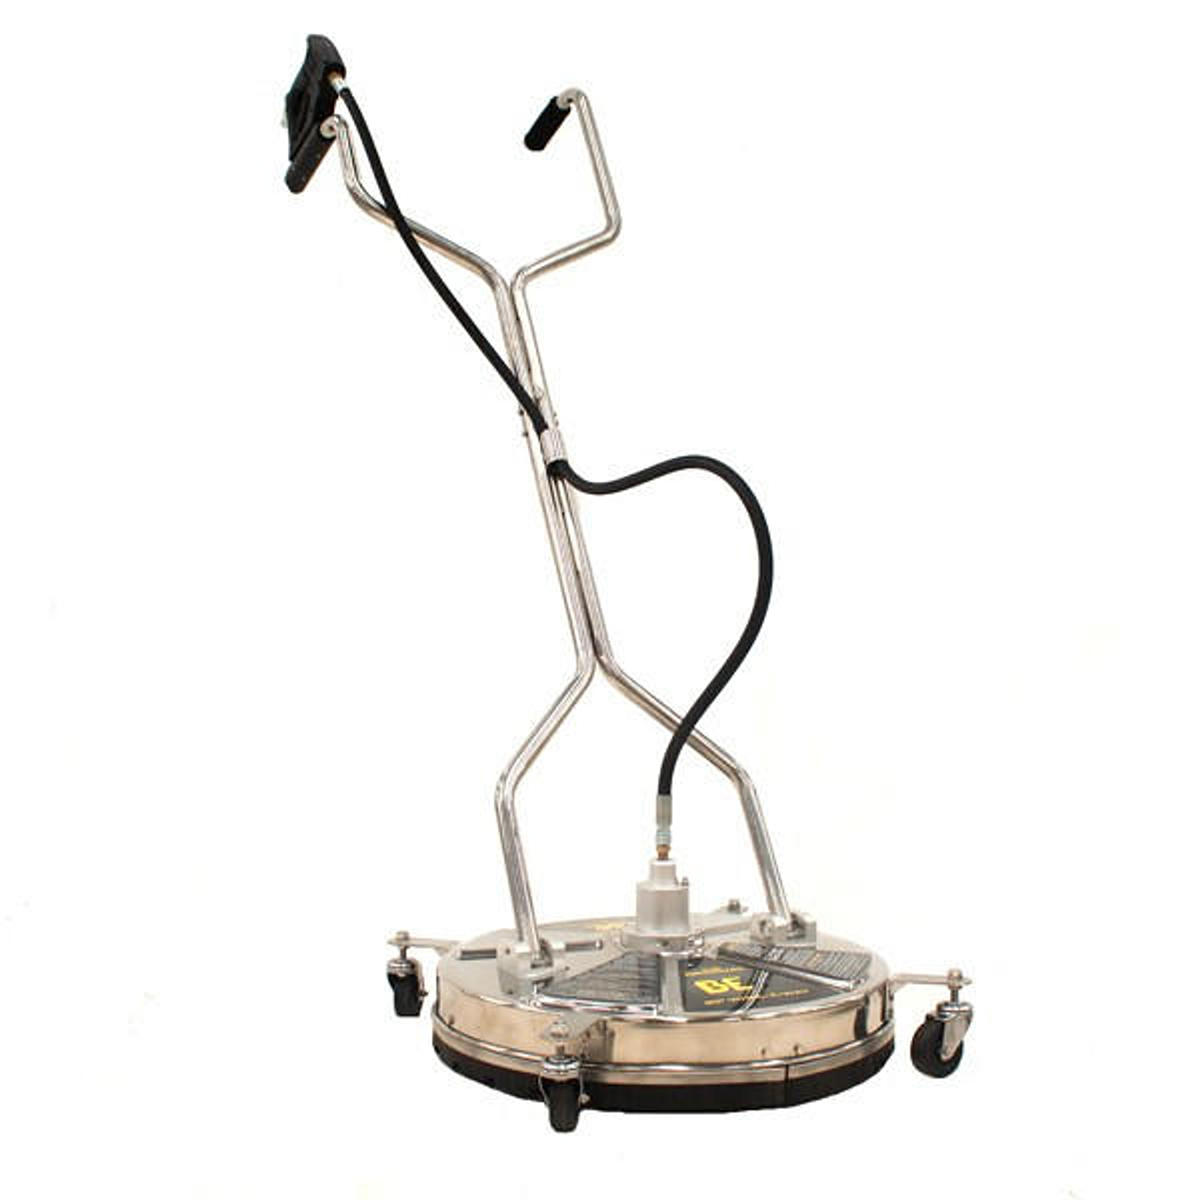 BE-85.403.009-Pressure-Whirlaway-20-inch-Stainless-Steel-Rotary-Surface-Cleaner-With-Castor-Wheels-angle-main